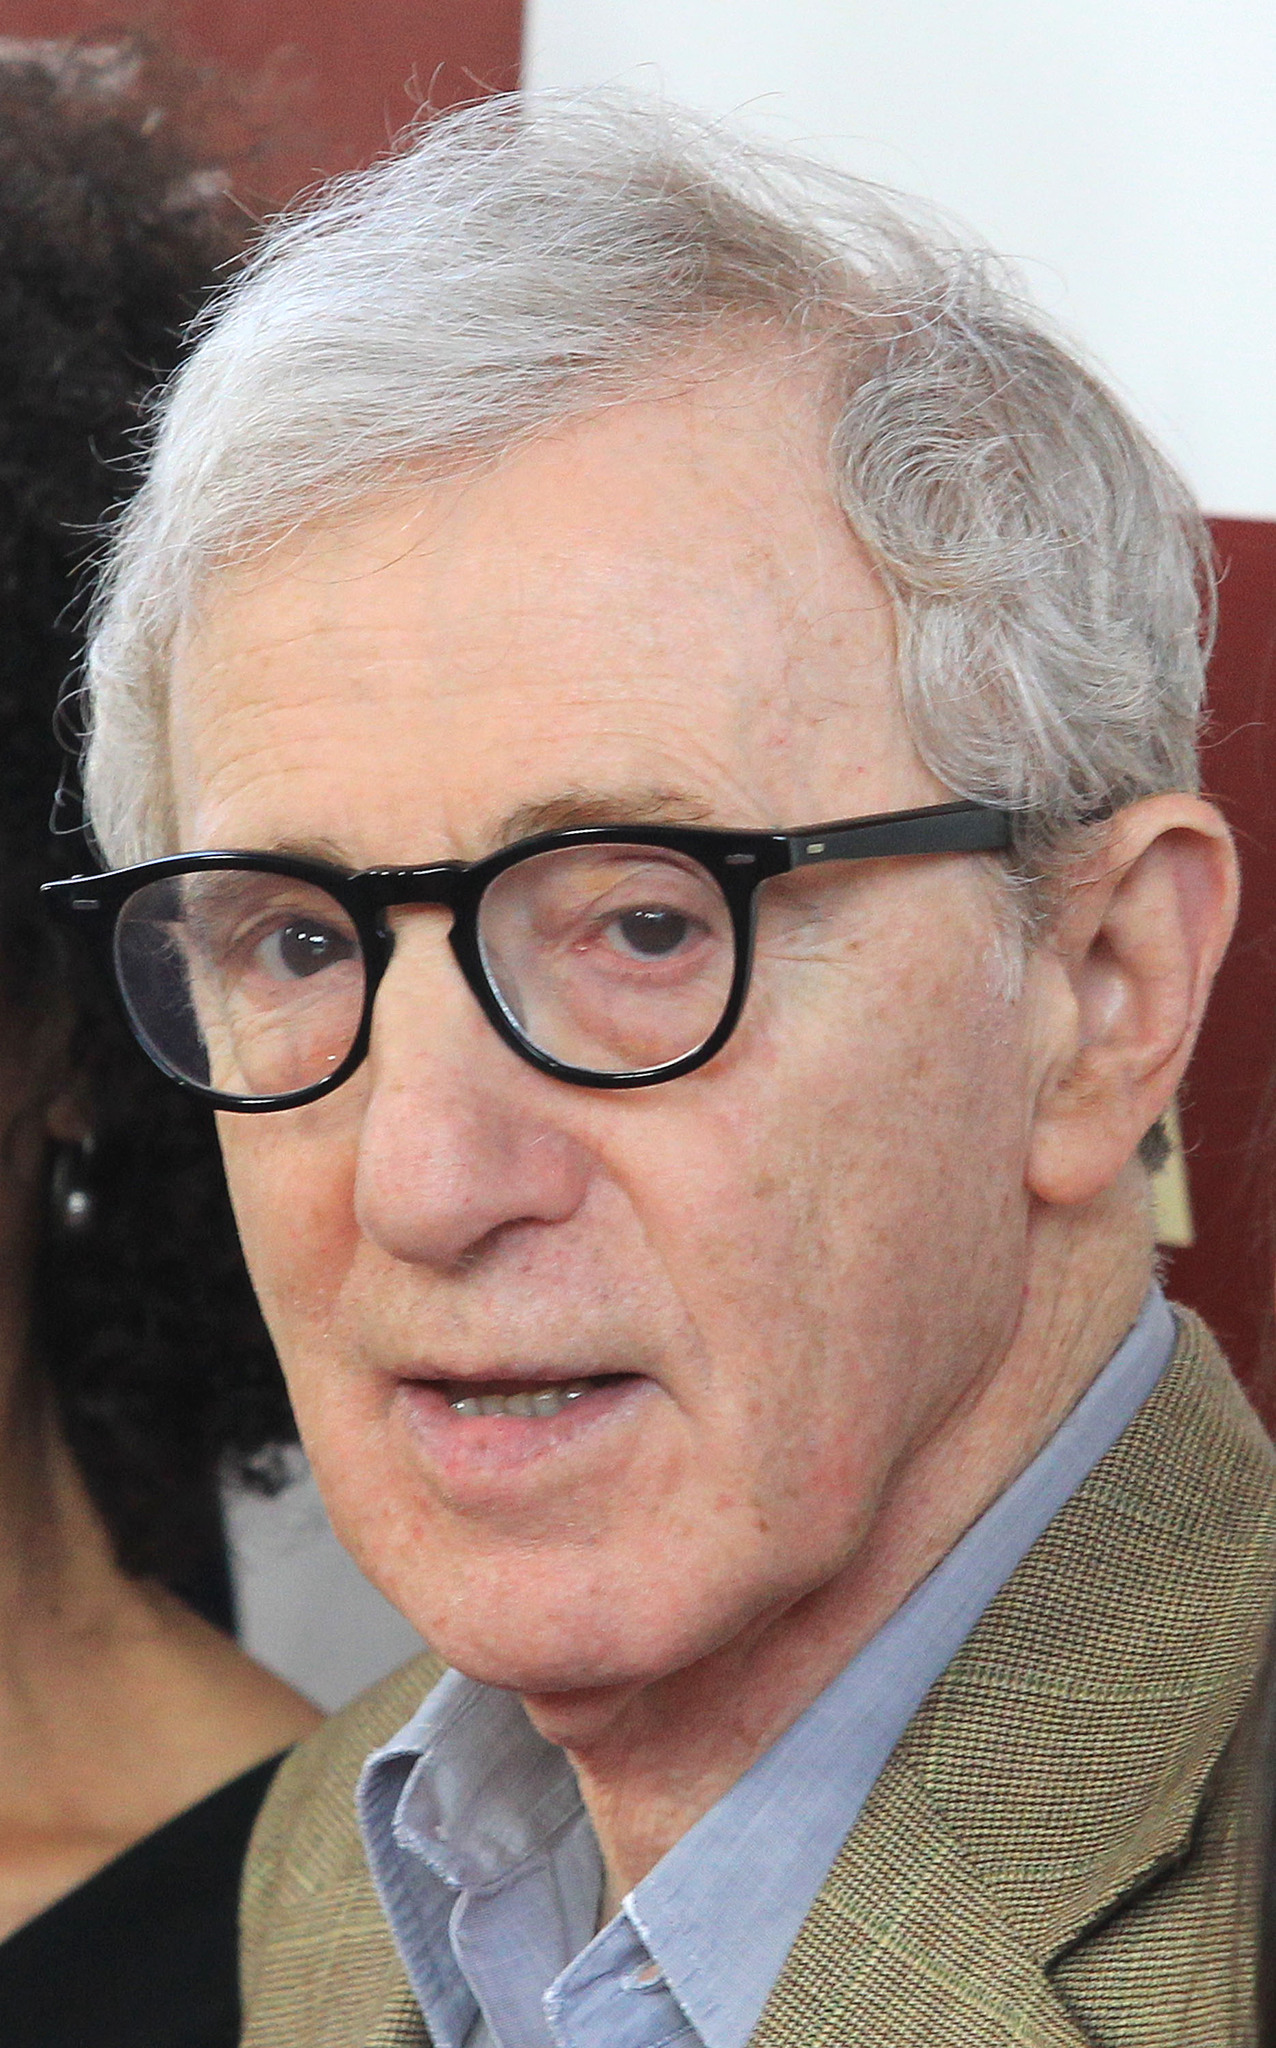 Woody Allen at event of I Roma su meile (2012)